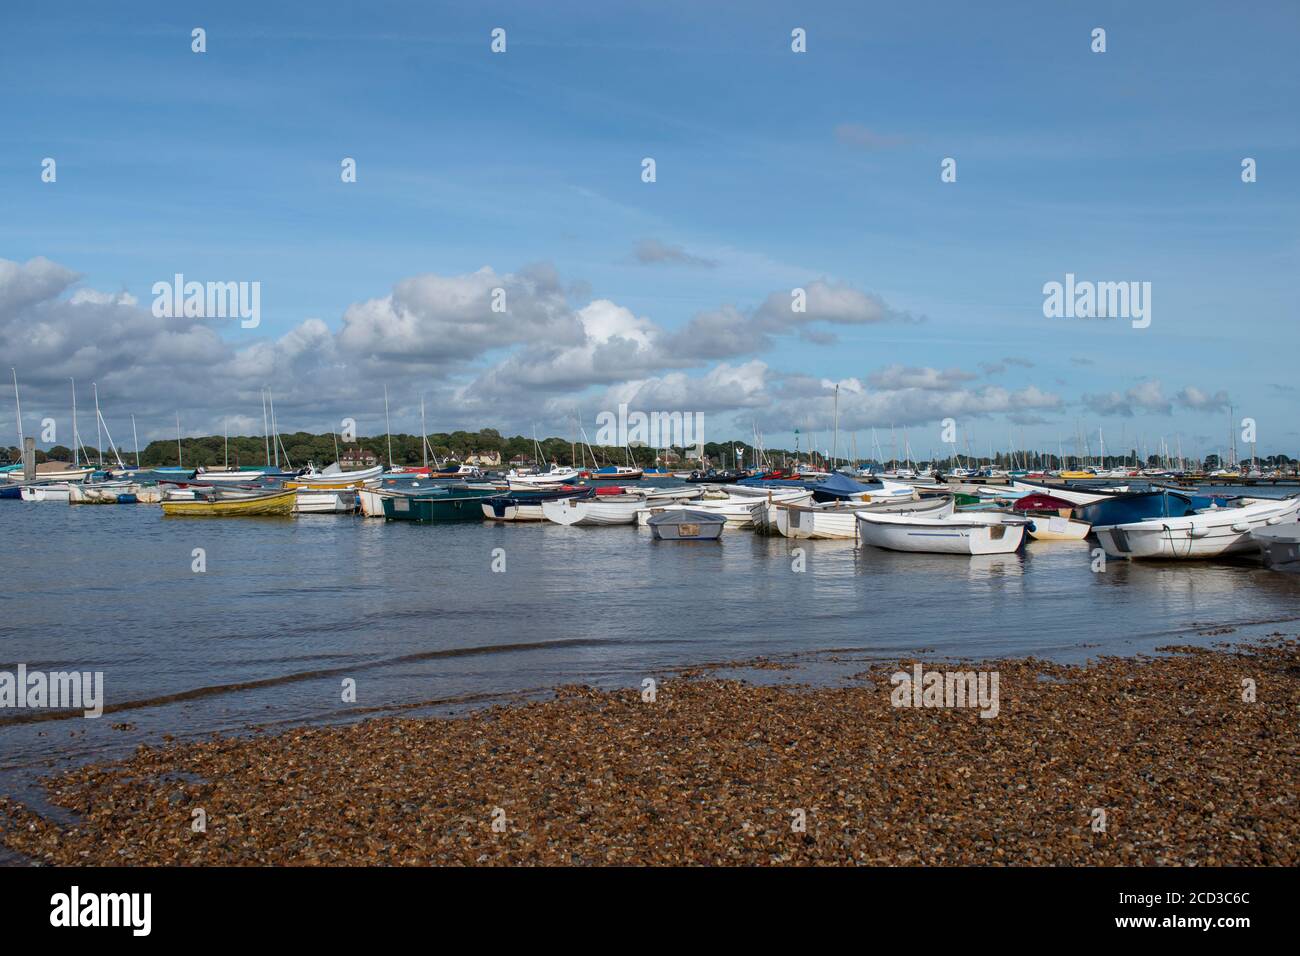 Small beach at Itchenor with a view of the many small boats moored in the estuary. Stock Photo